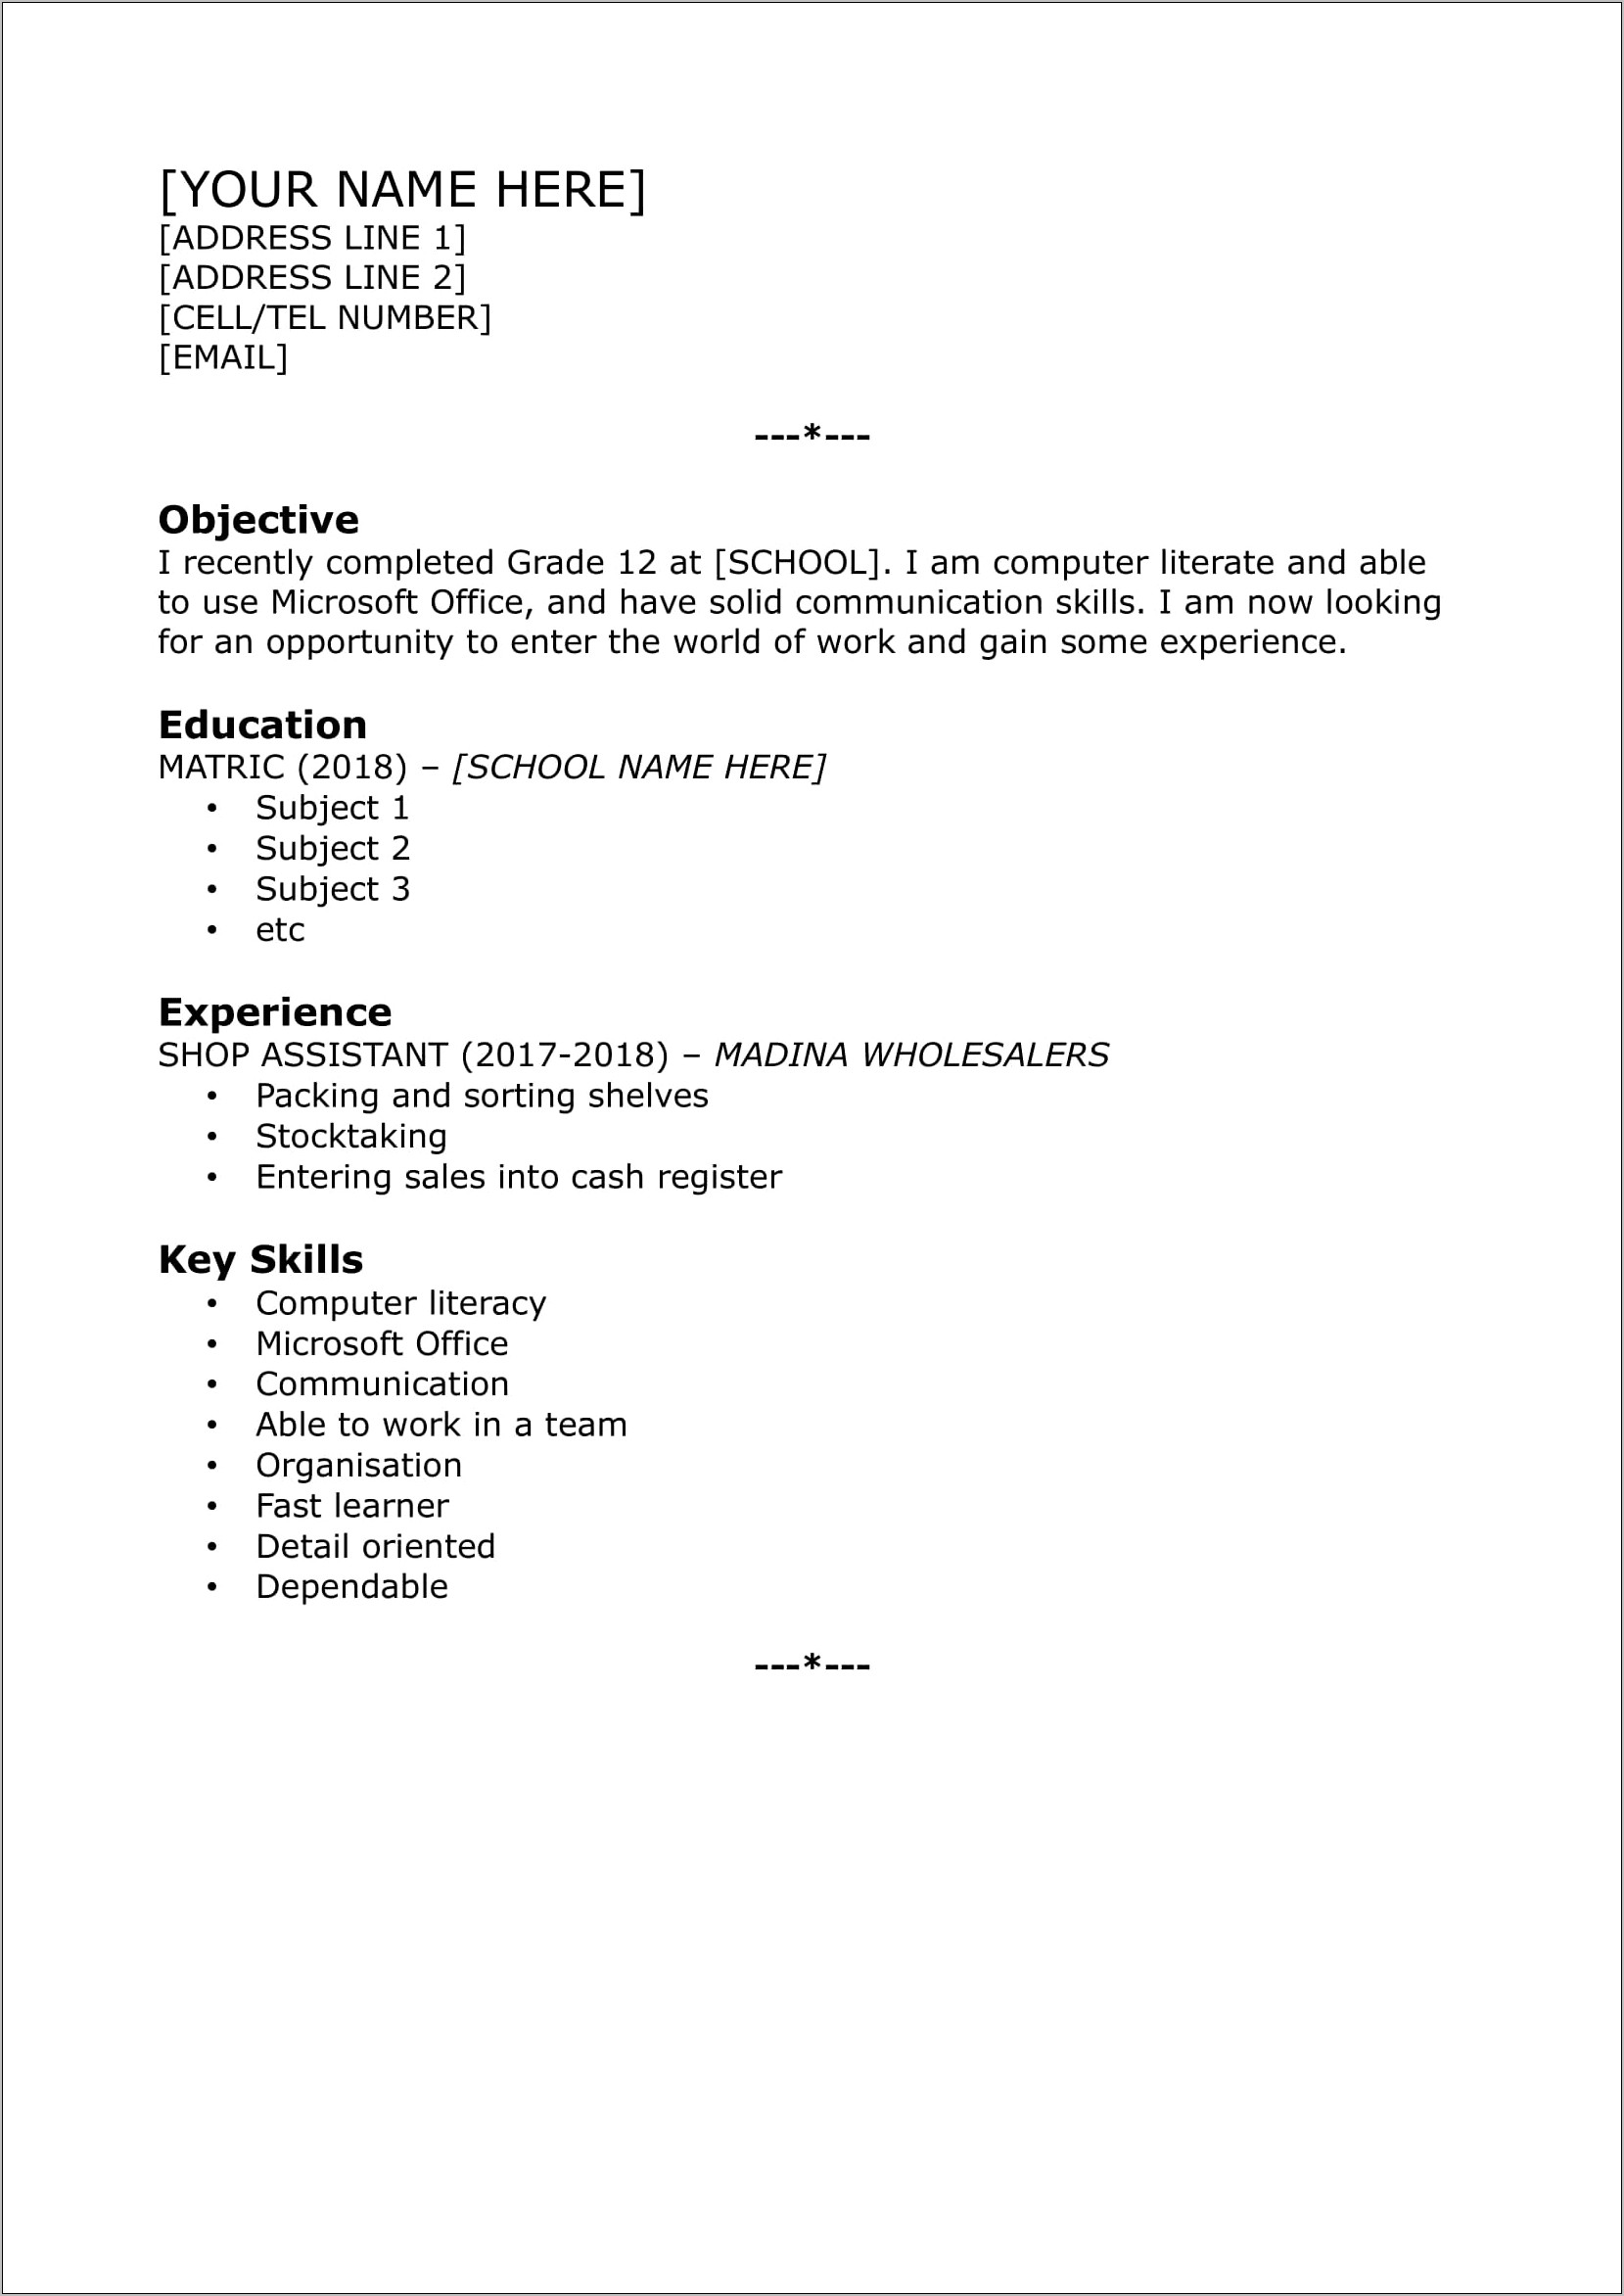 Resume For Student With No Work Experience Samples